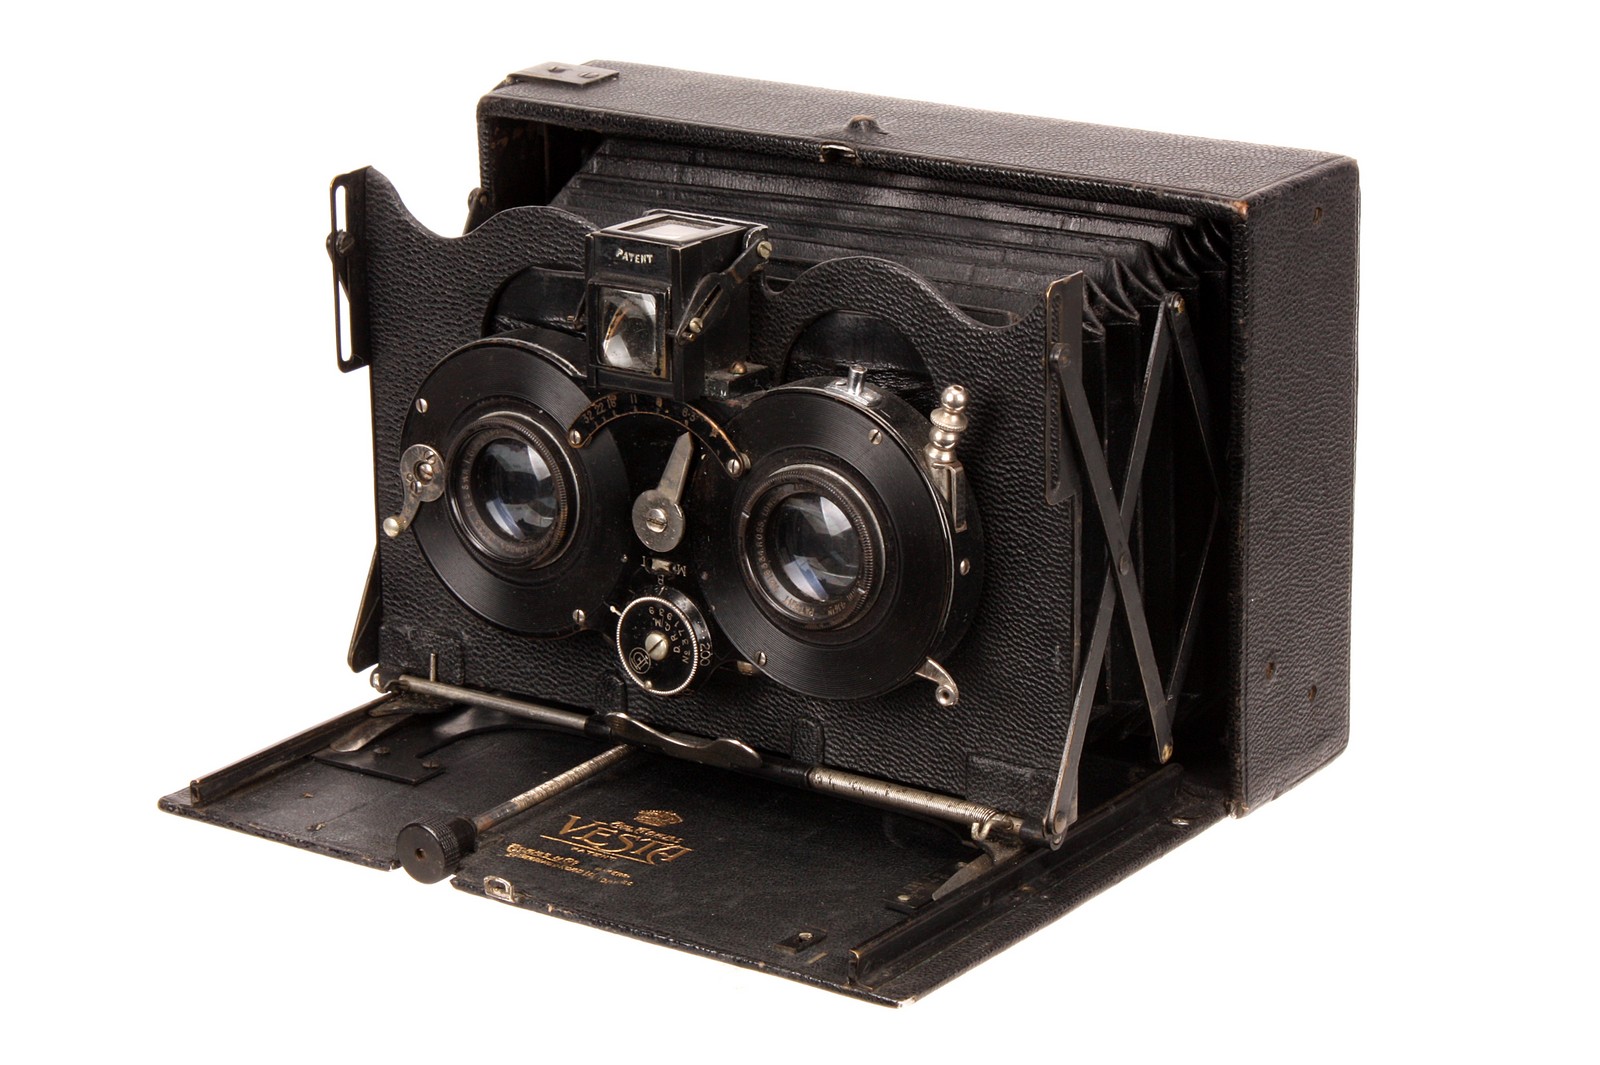 An Adams & Co. Vesta Stereo Camera, 10x15cm, serial no. 905, with Ross Zeiss Tessar f/6.3 112mm